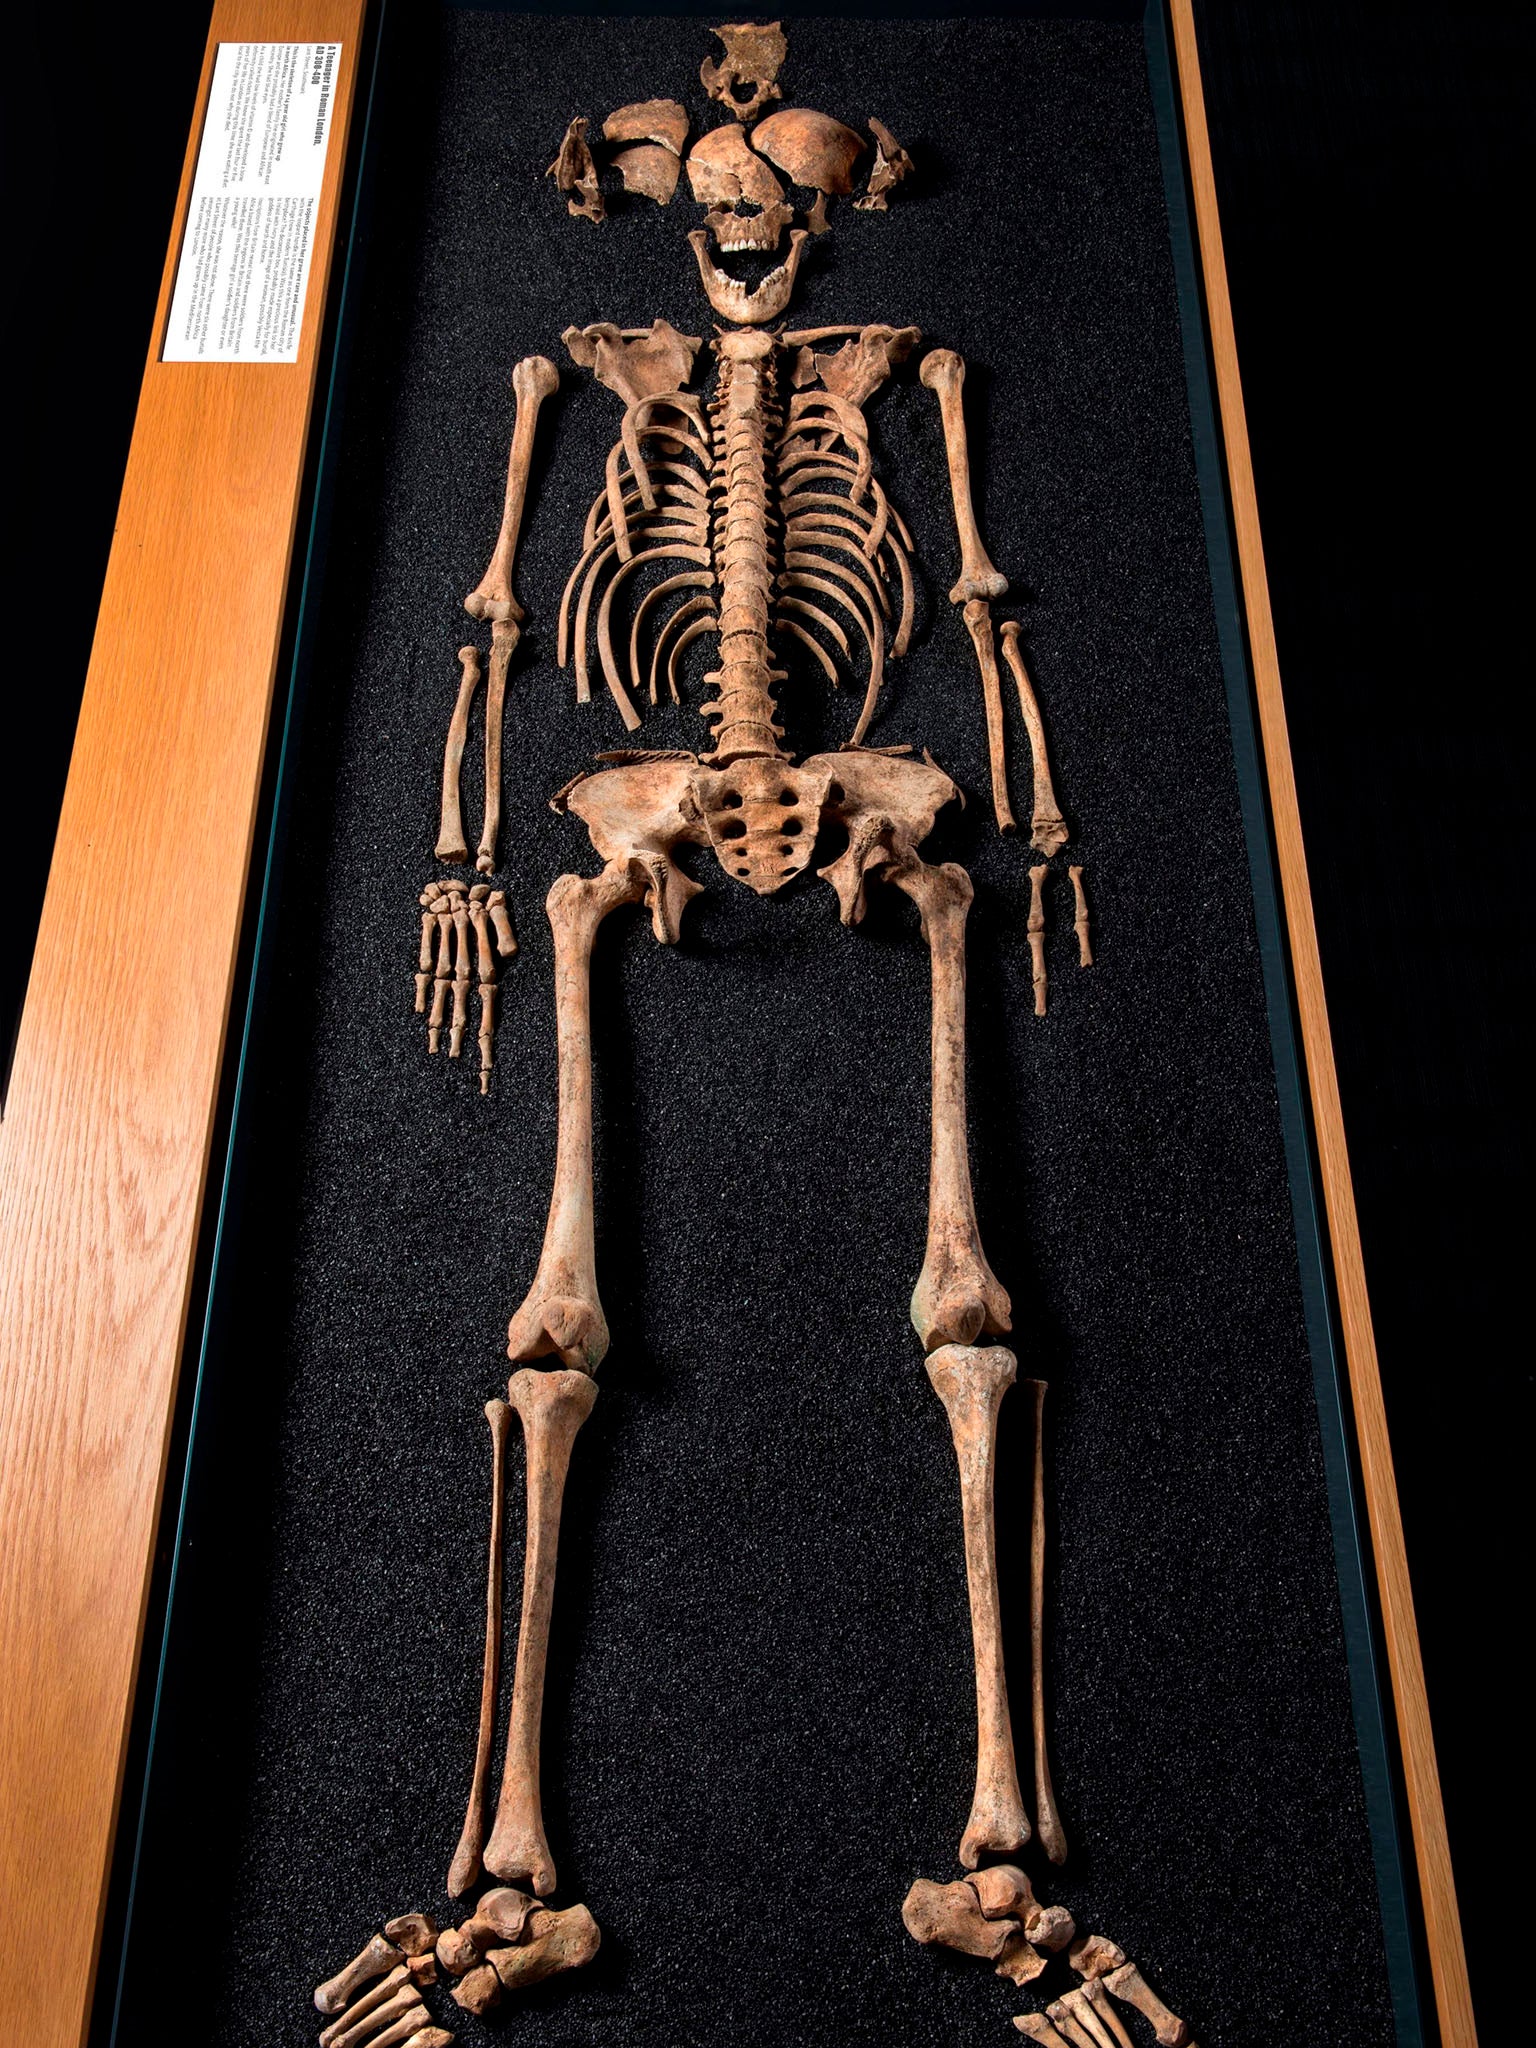 One of the skeletons found at the site in Lant Street, Southwark